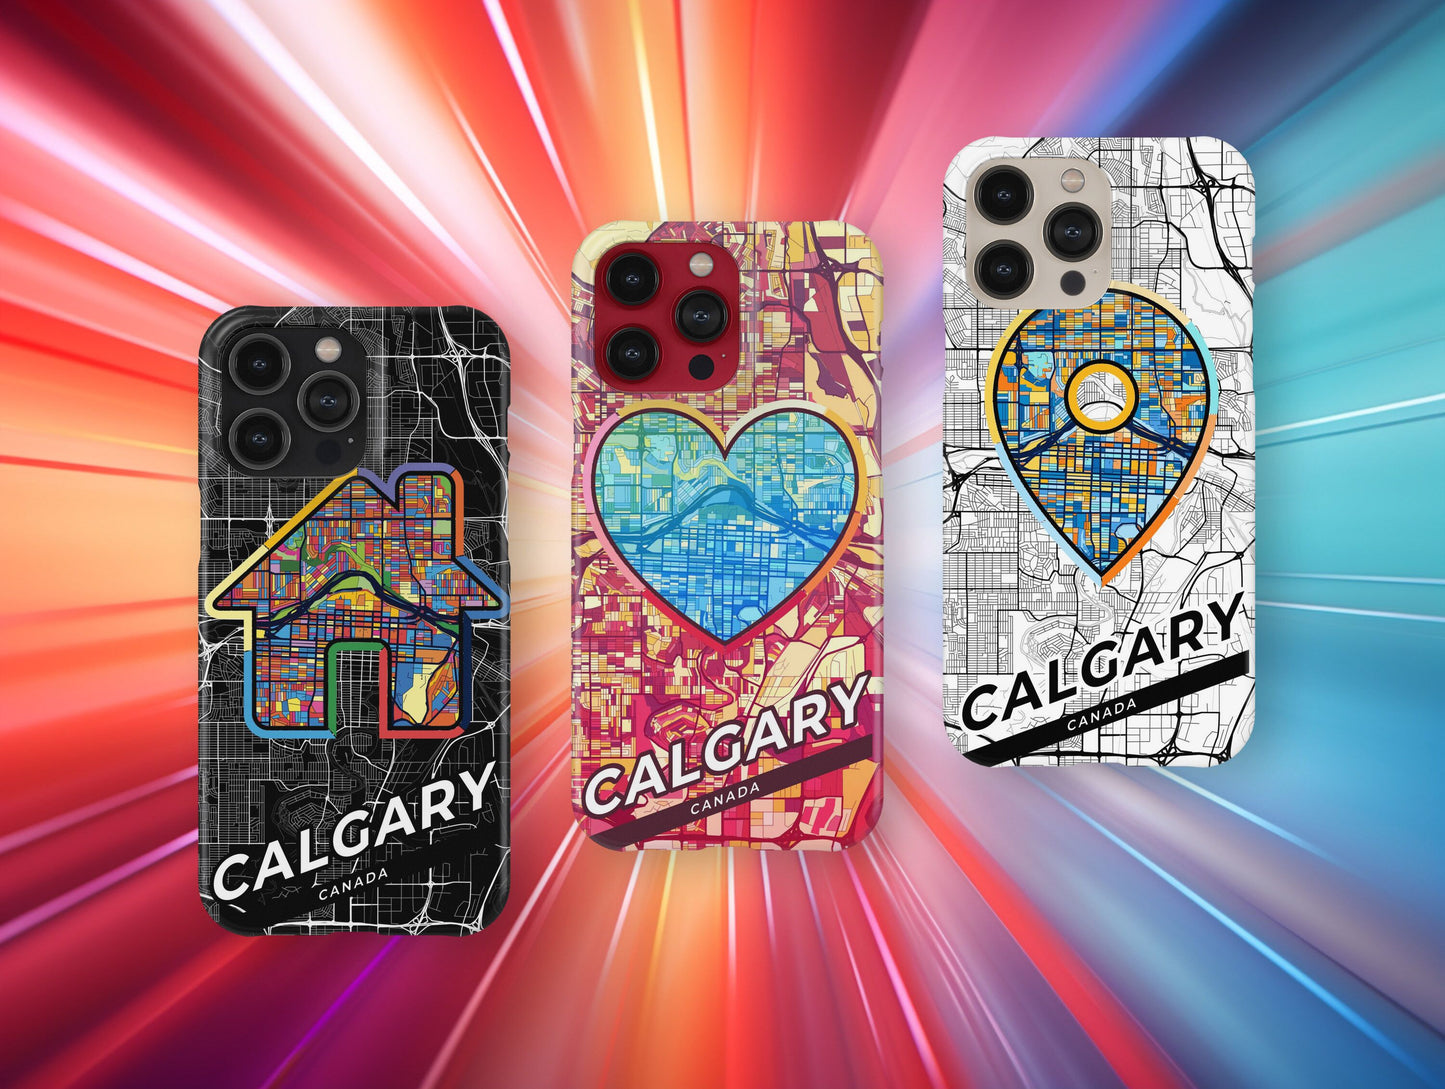 Calgary Canada slim phone case with colorful icon. Birthday, wedding or housewarming gift. Couple match cases.